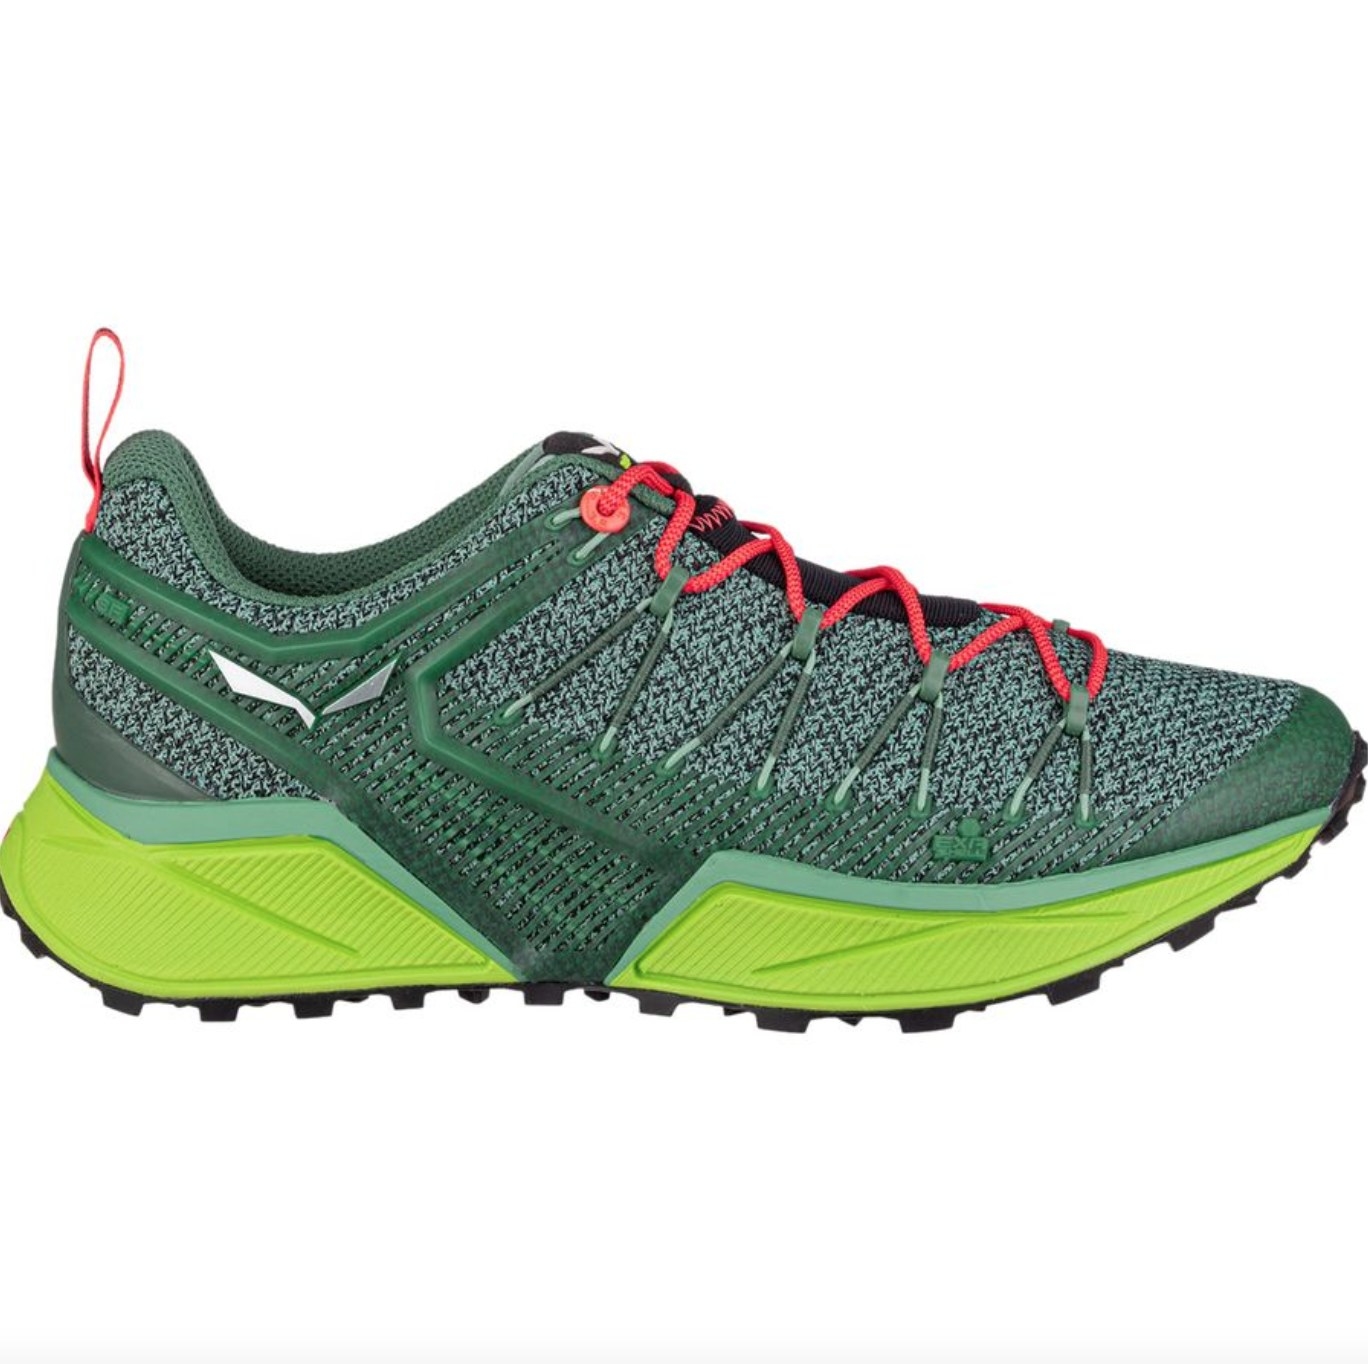 The pair of trail running shoes in green with lime green soles and red laces